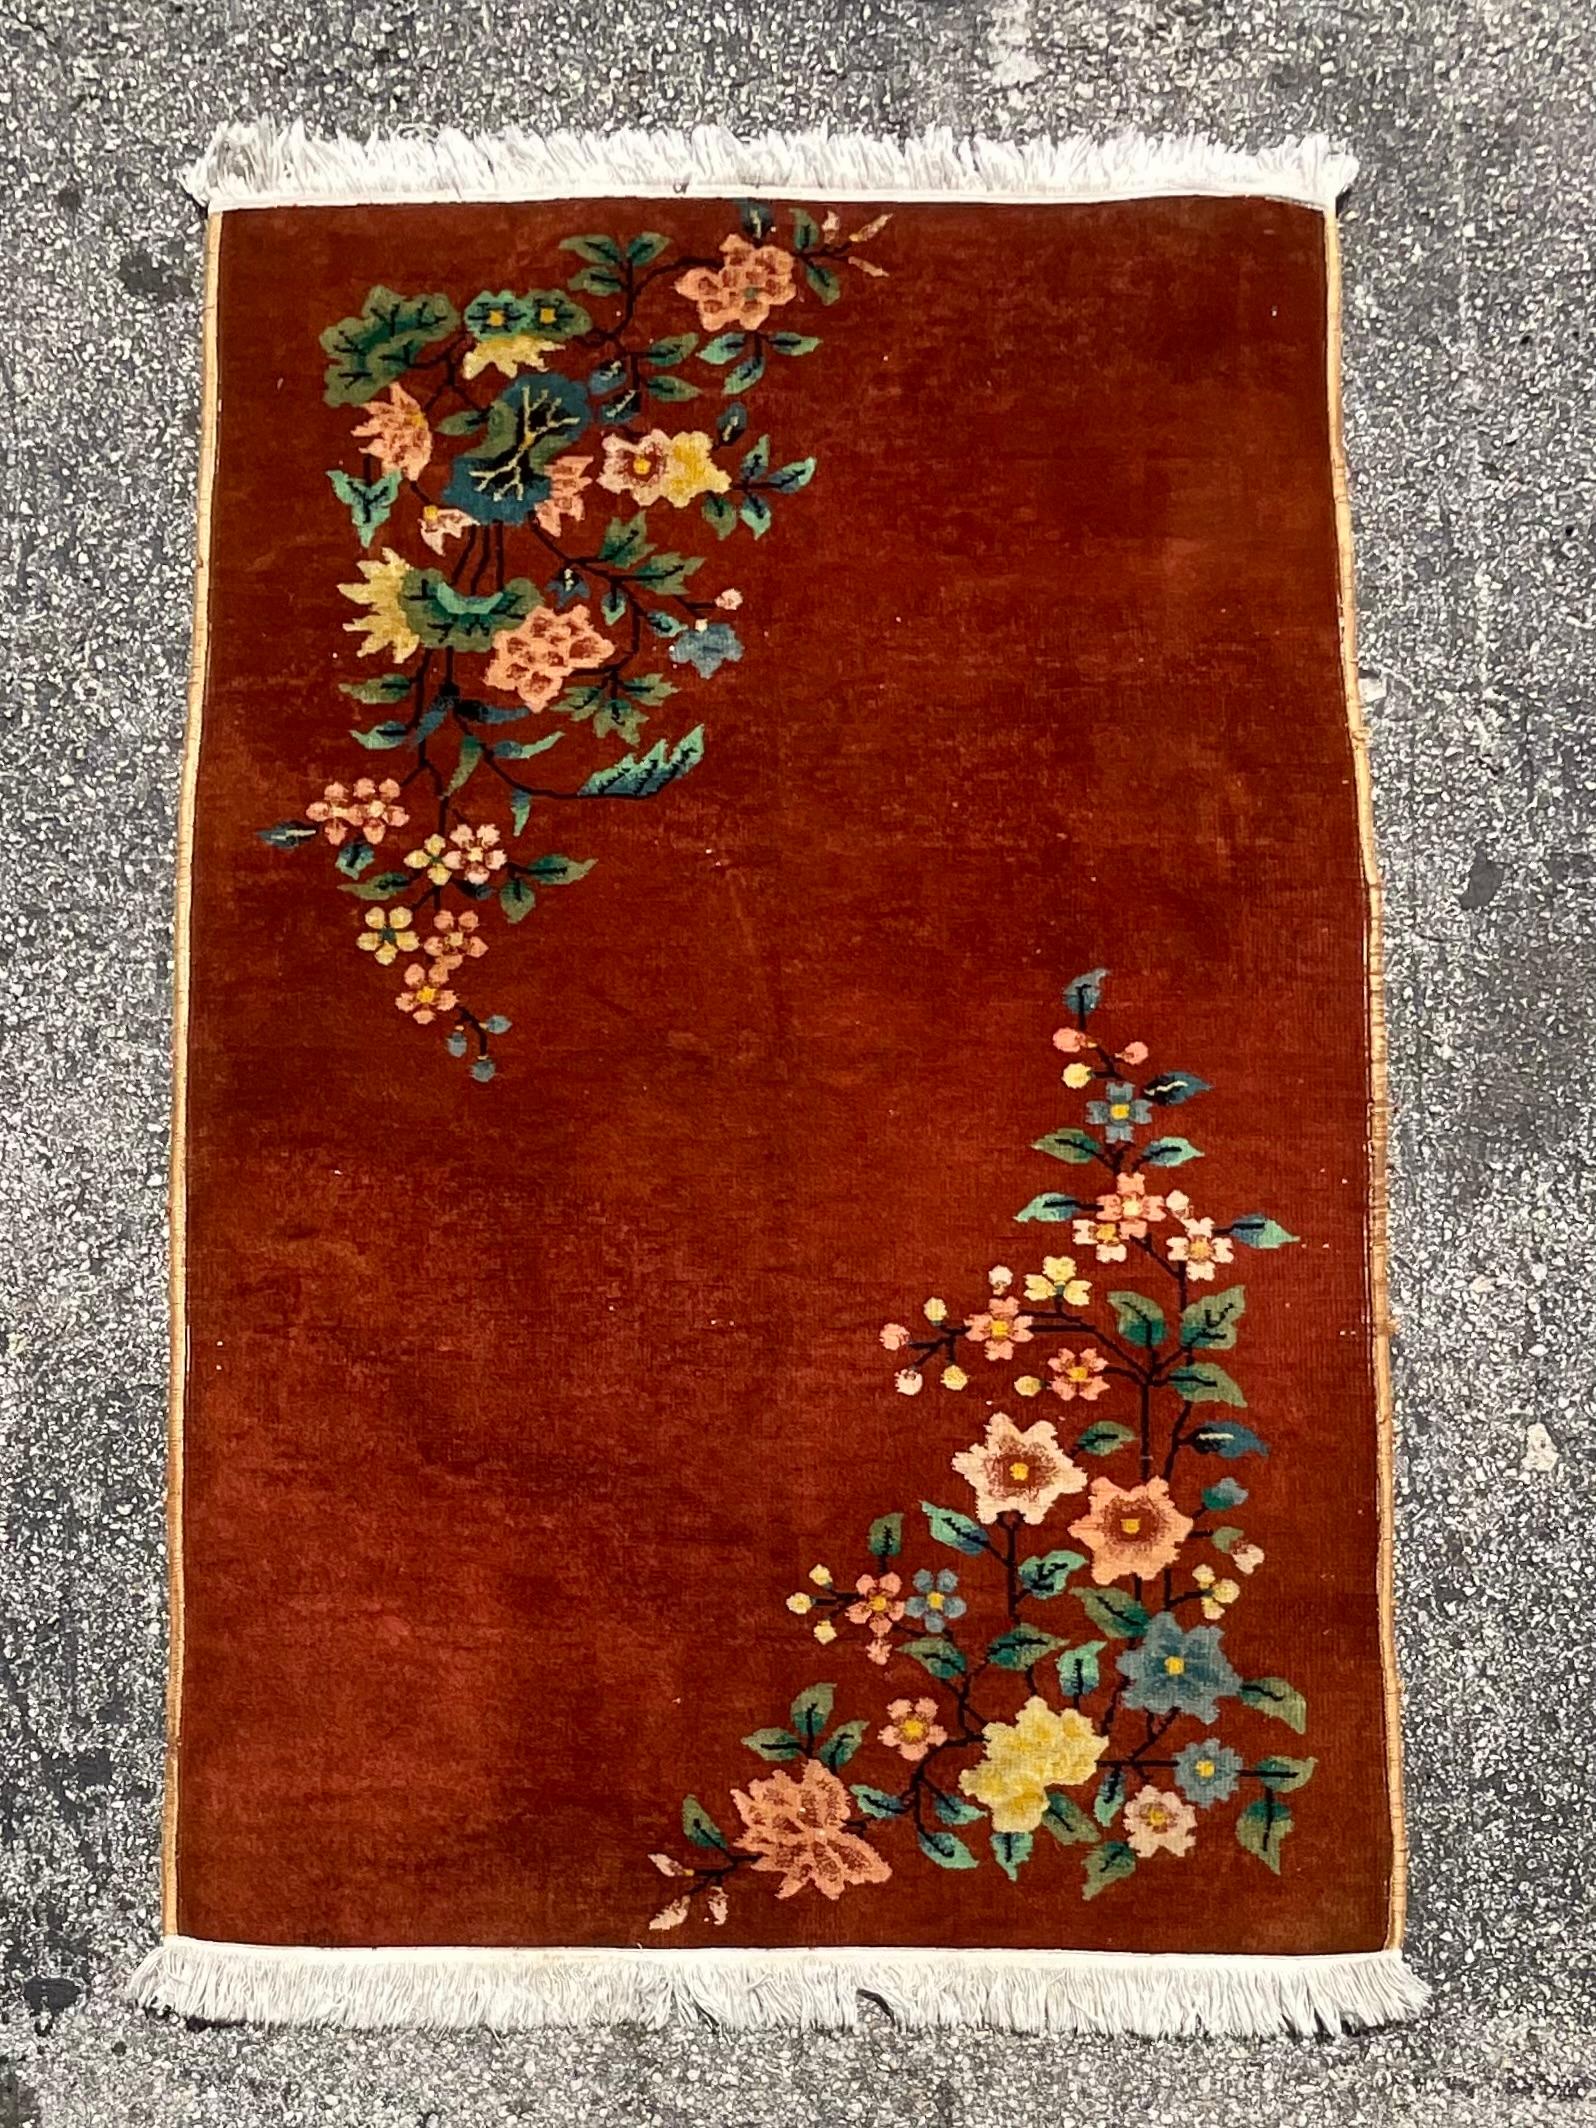 Gorgeous vintage art deco rug in the style of Chinese Nichols. Brightly colored intertwined floral design in two corners that would be a great pop to any room. Acquired from a Palm Beach Estate